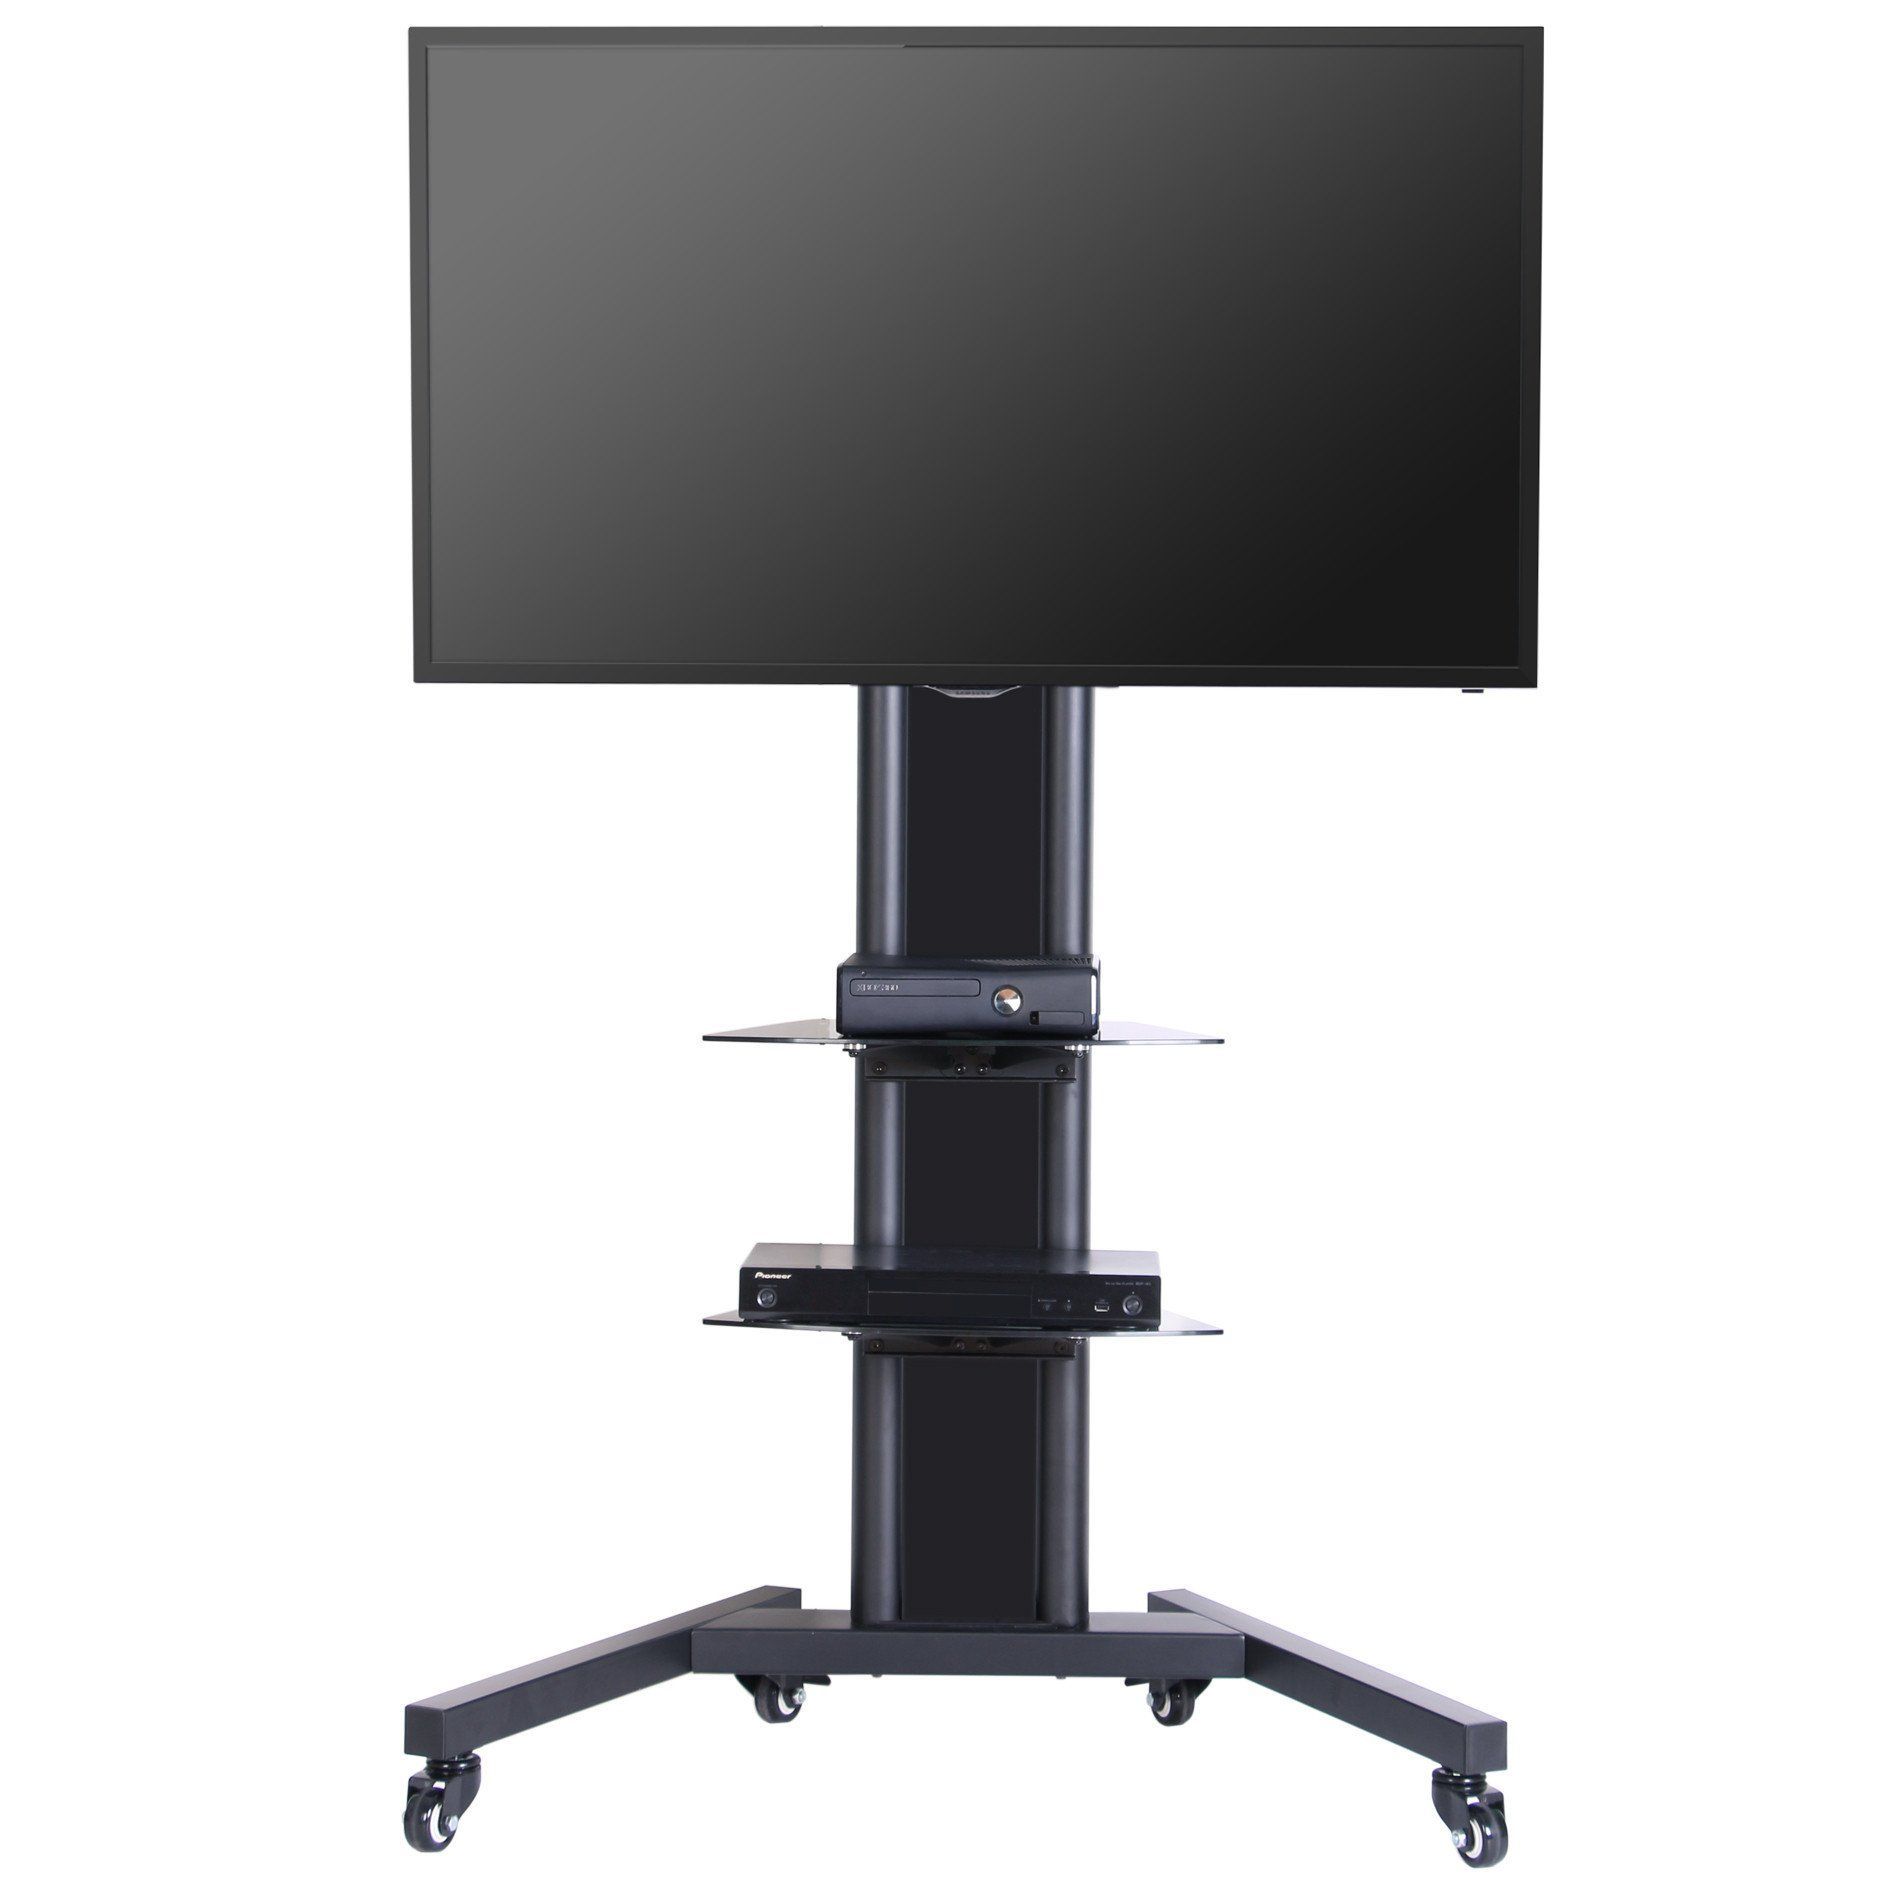 Mobile Tv Stand With Mount For Up To 65 Inch Tv With With Lockable Tv Stands (View 2 of 15)